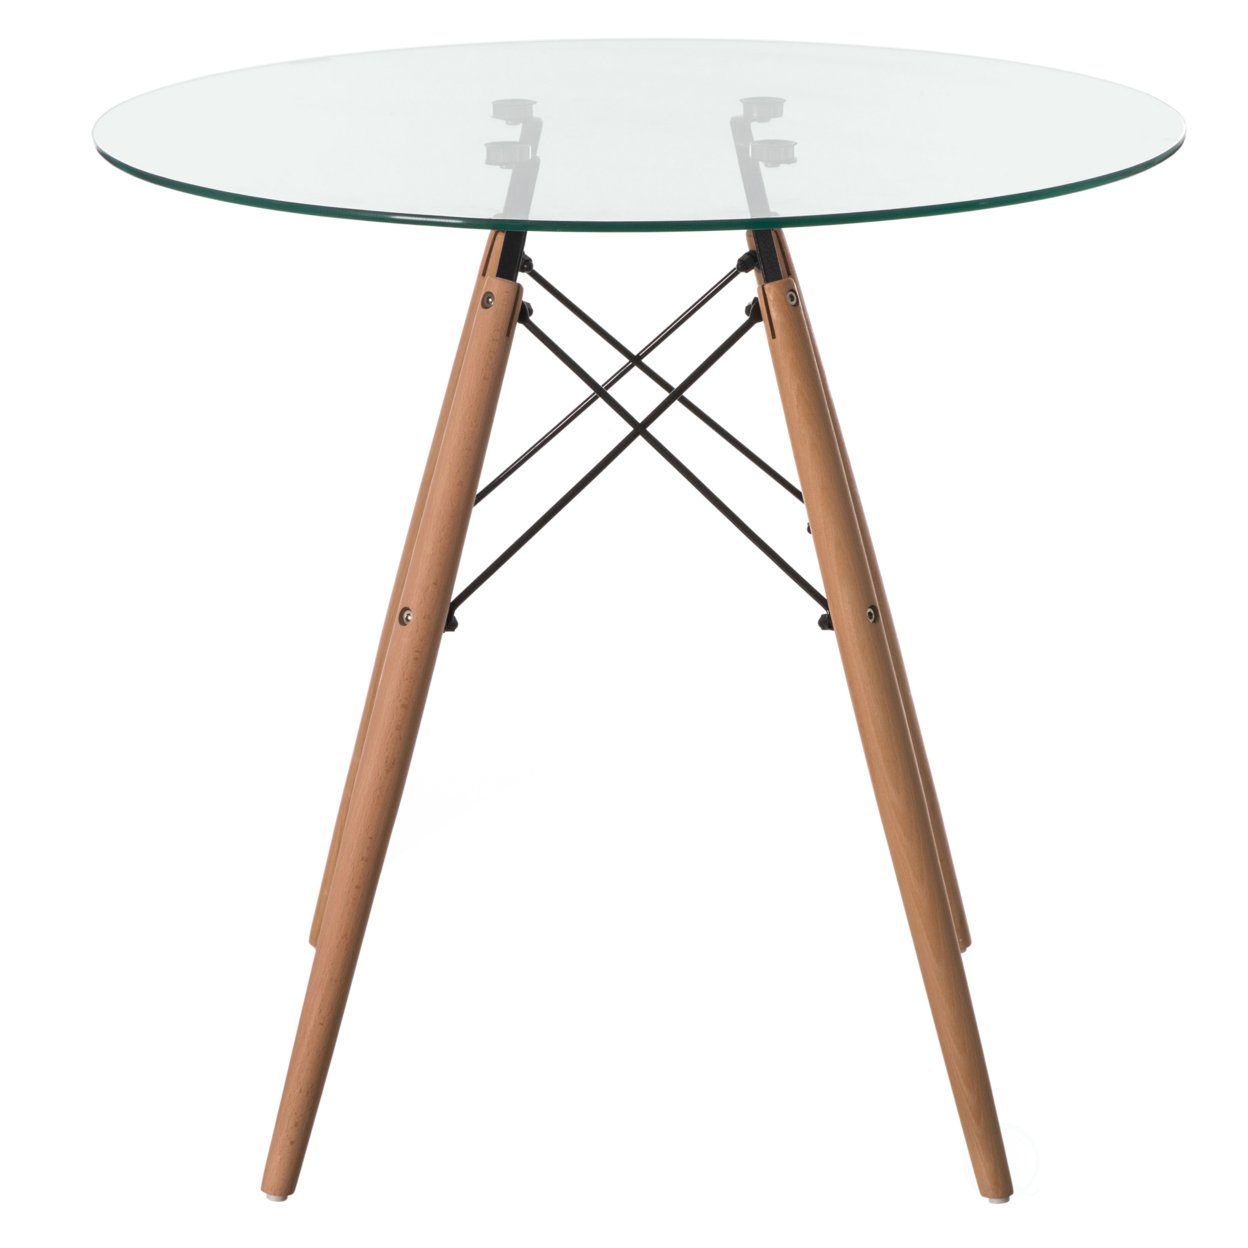 Fabulaxe Round Clear Glass Top Accent Dining Table with 4 Beech Solid Wood Legs Modern Space Saving Small Leisure Circle Desk